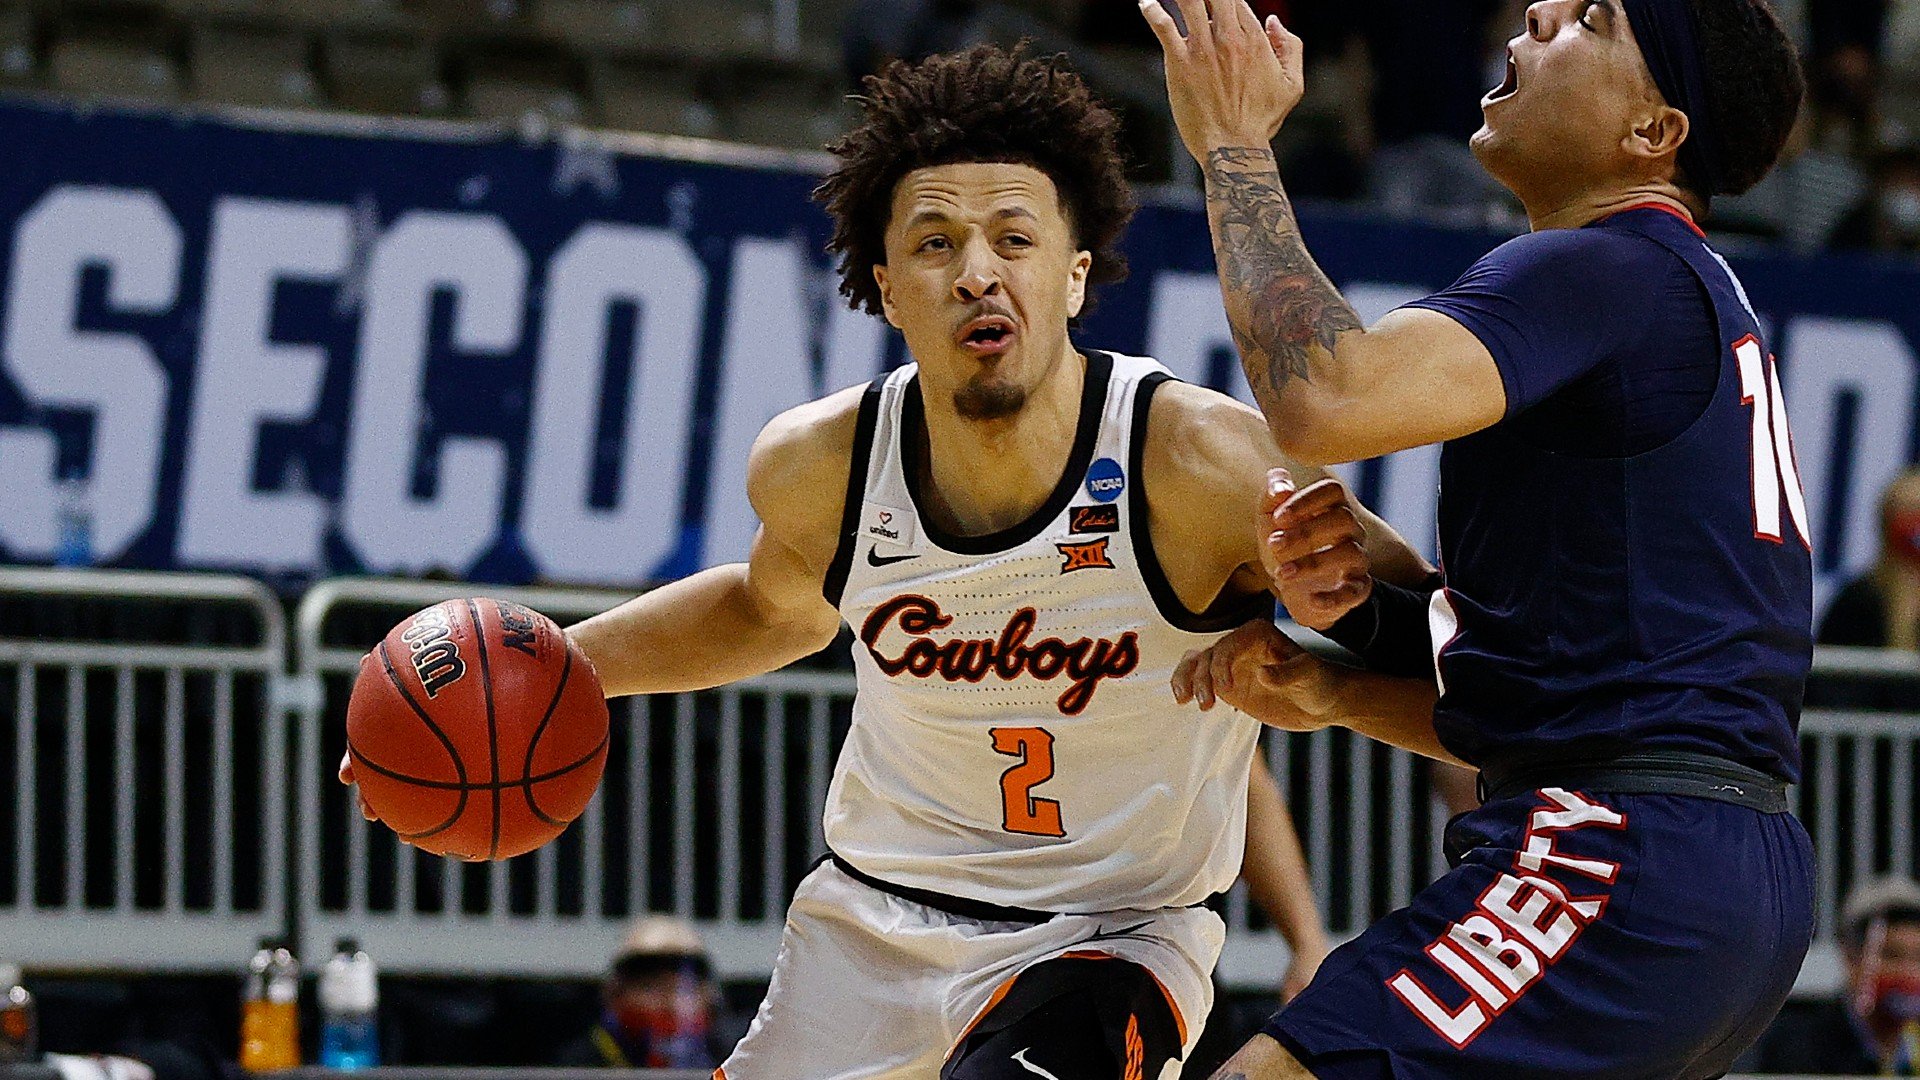 NBA Mock Draft 2021: Is Cade Cunningham or Jalen Green the No. 1 overall pick?